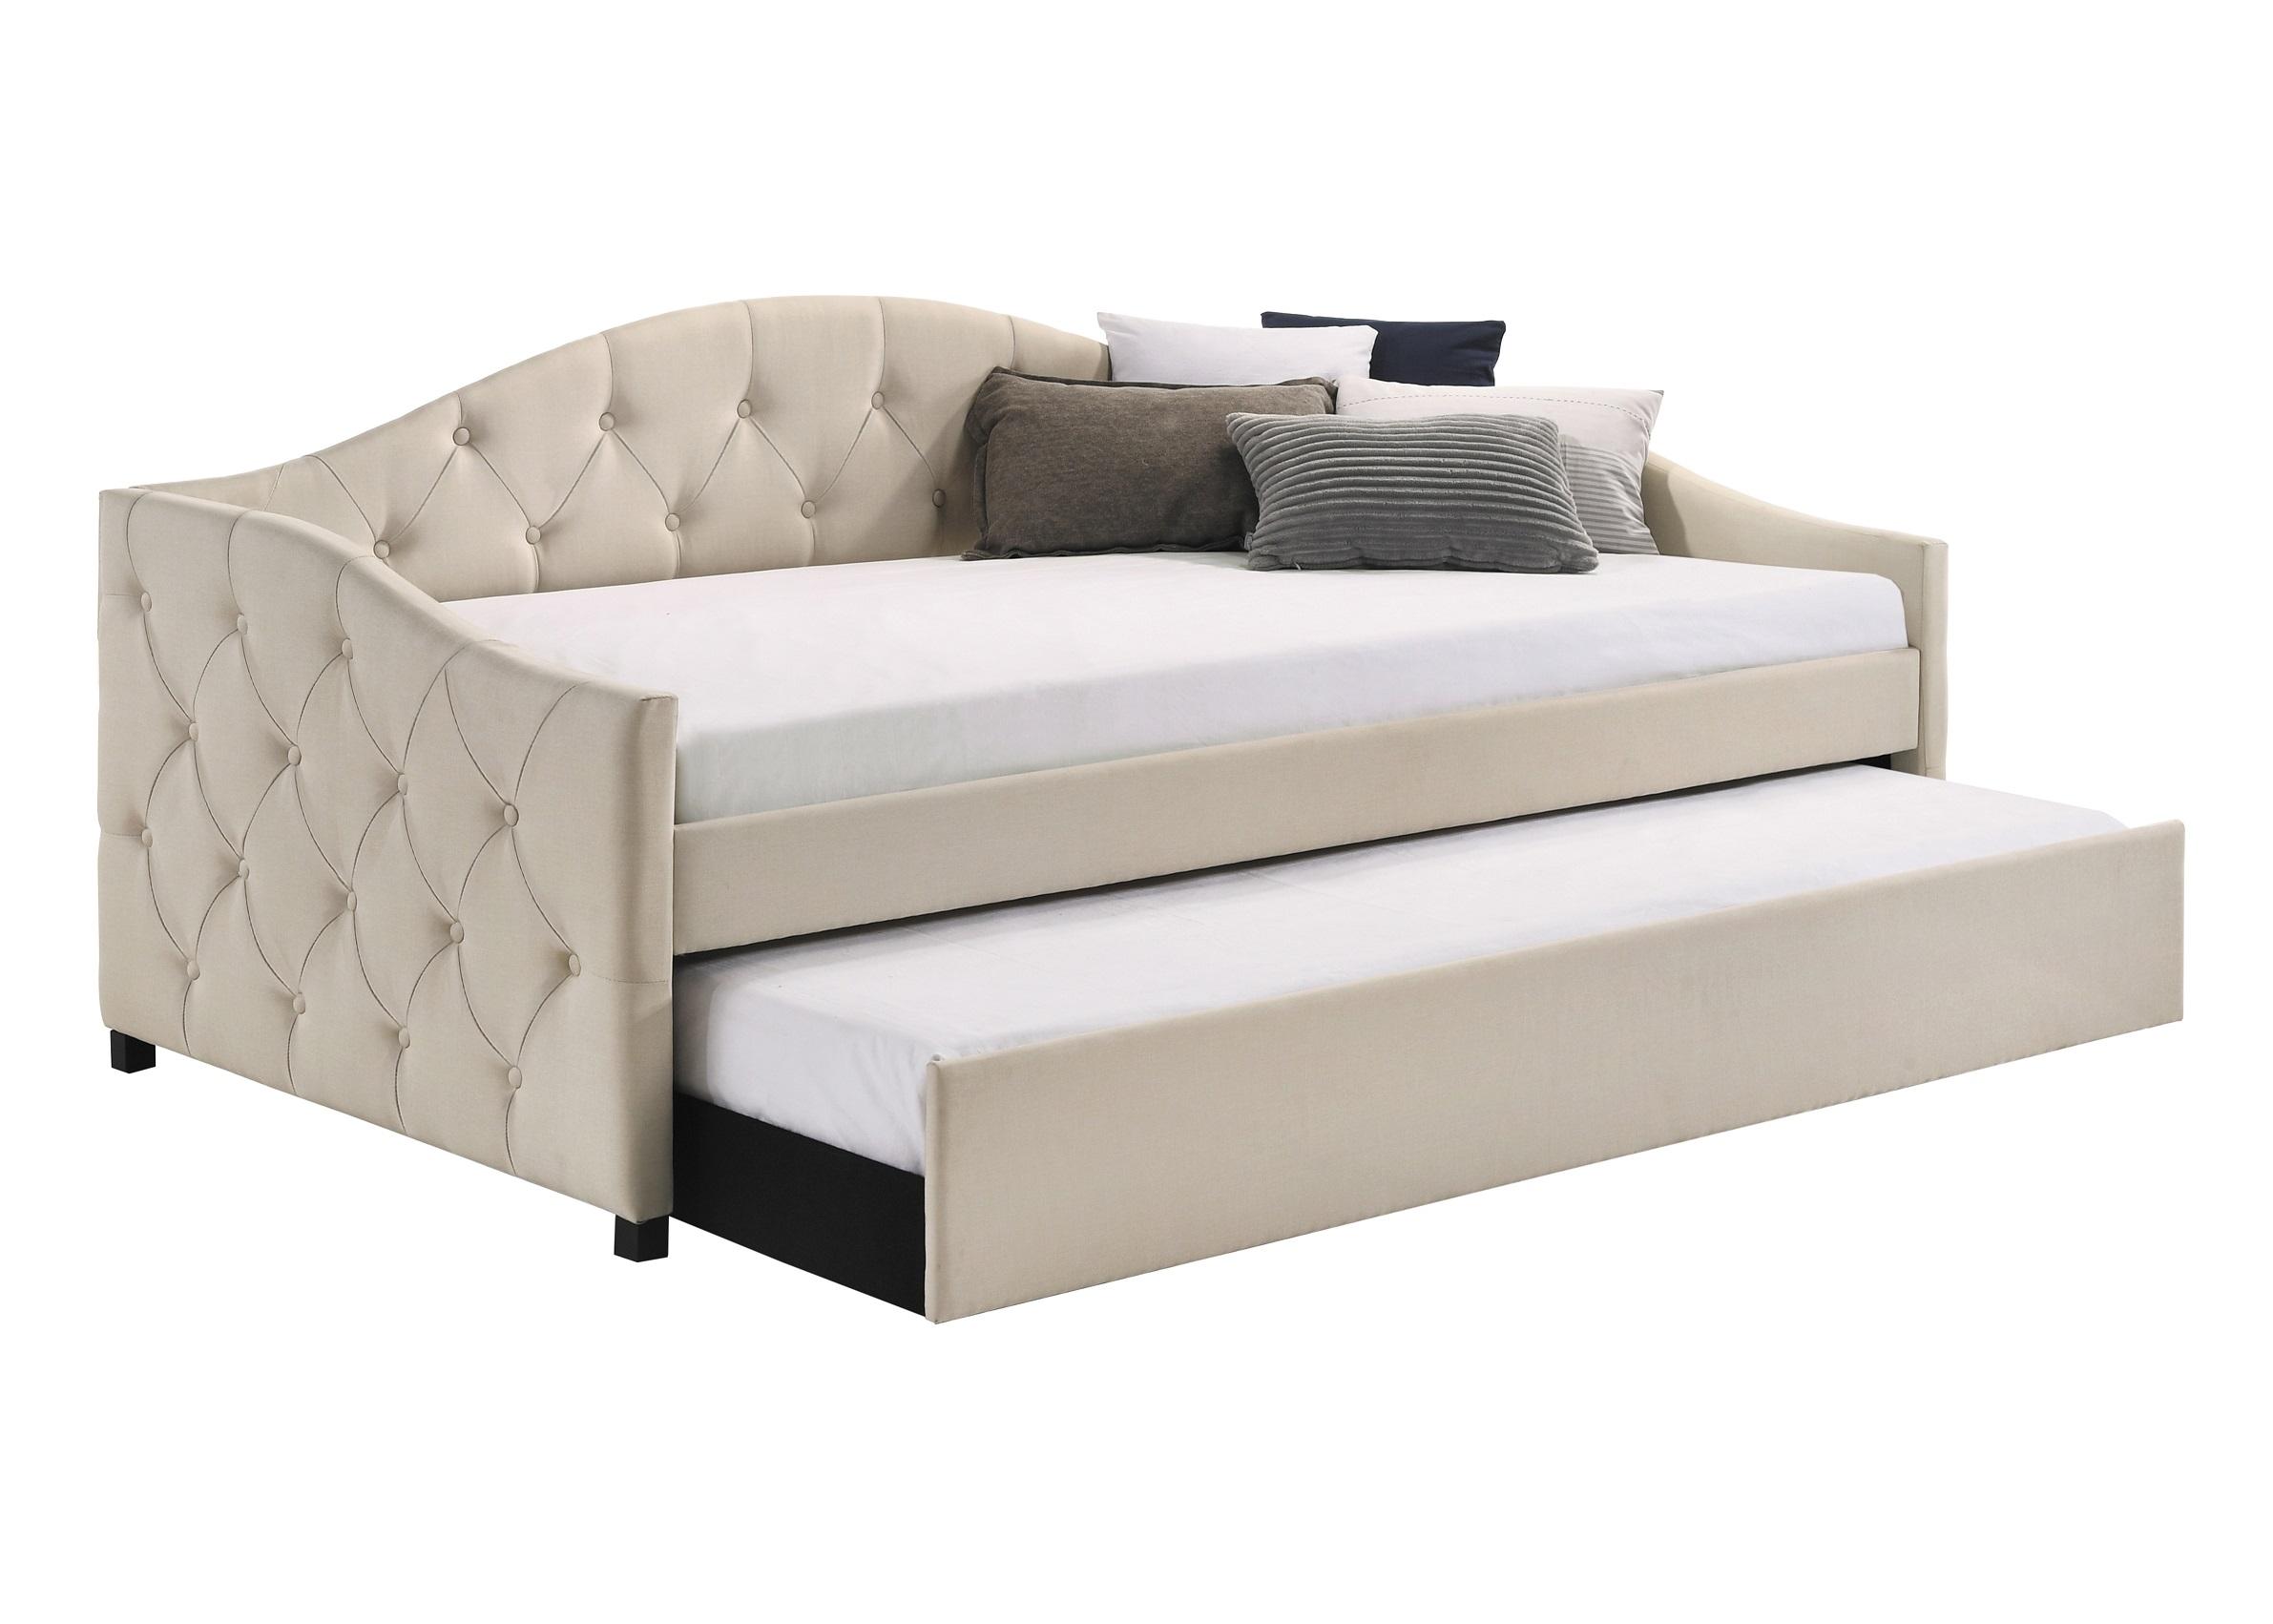 Coaster 300639 Sadie Daybed w/Trundle